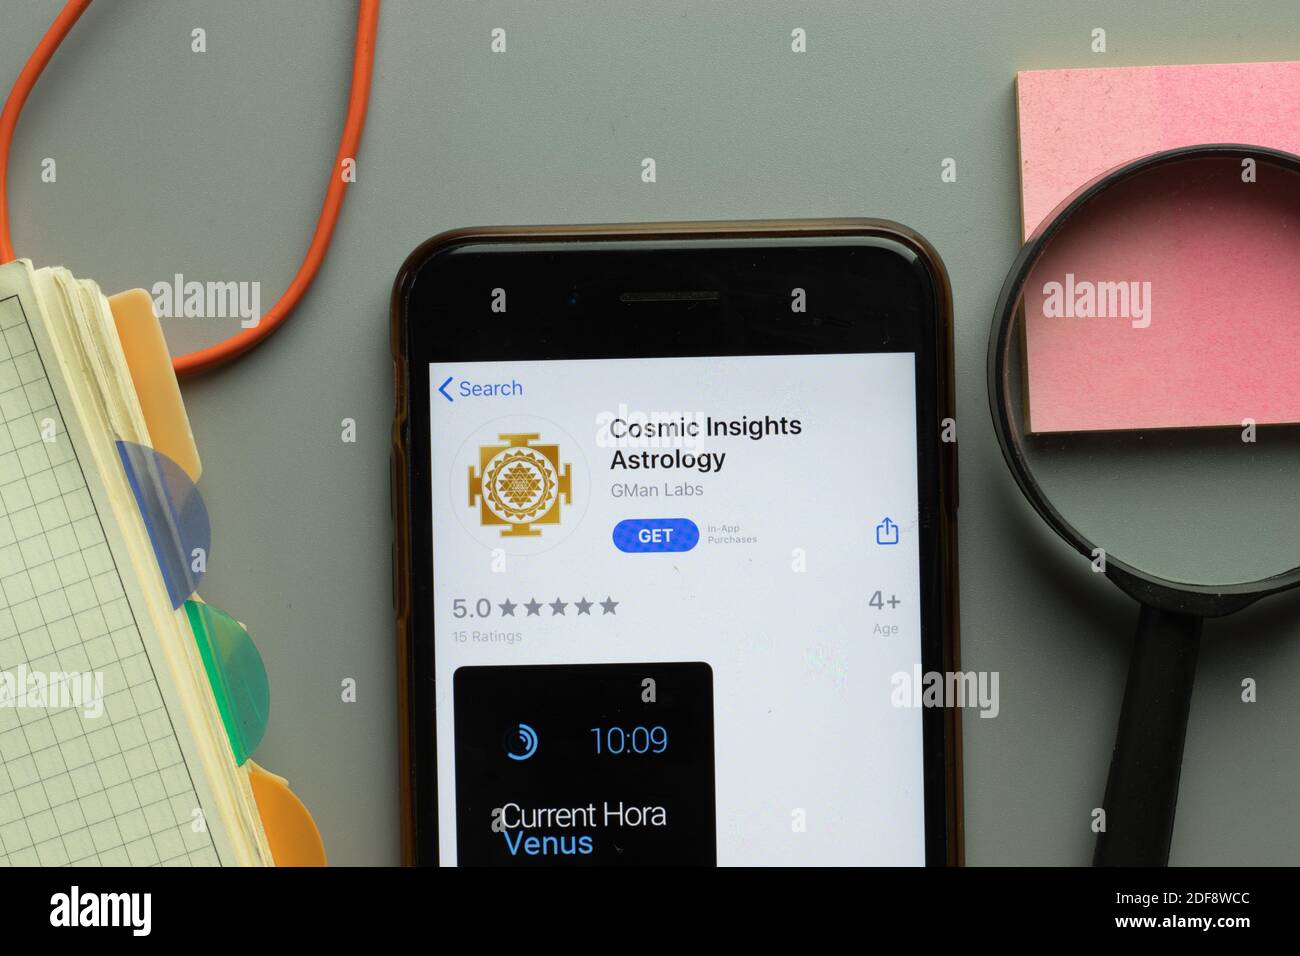 New York, USA - 1 December 2020: Cosmic Insights Astrology mobile app icon on phone screen top view, Illustrative Editorial. Stock Photo